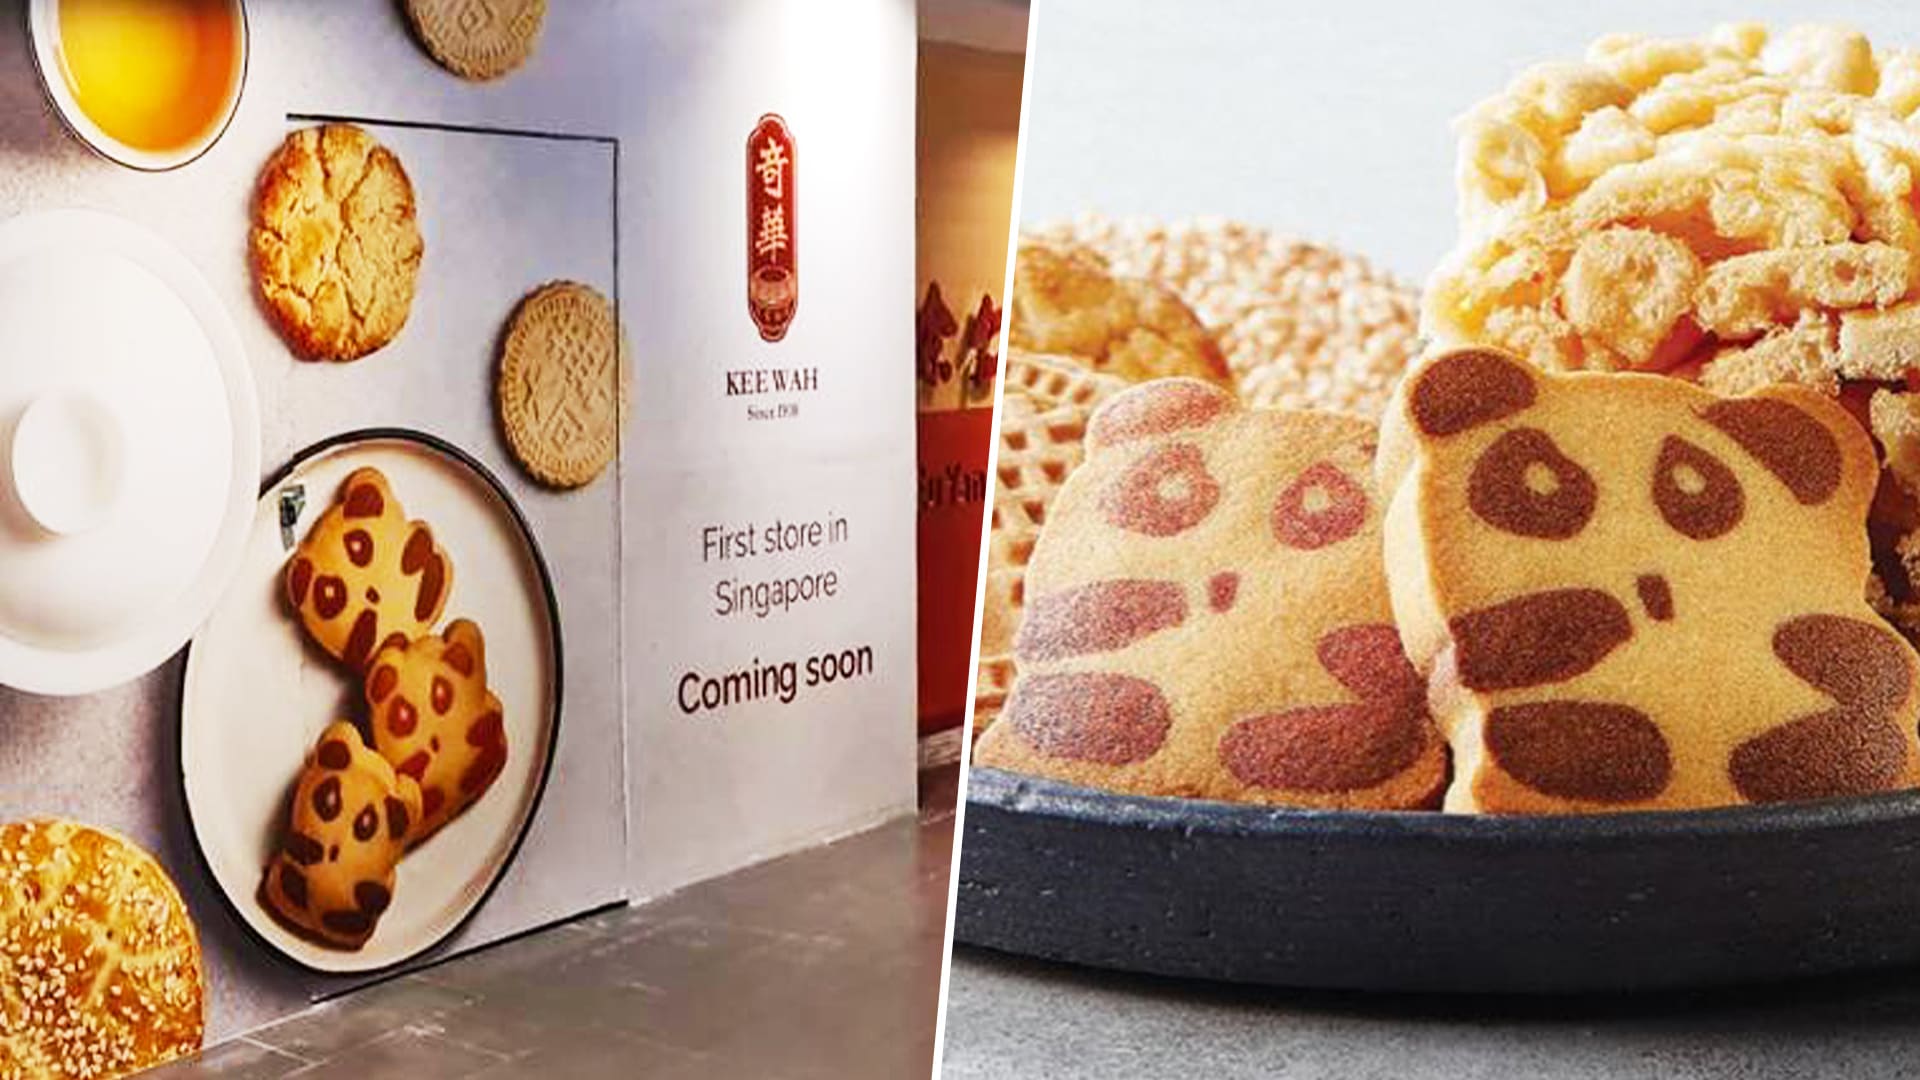 Kee Wah Bakery From HK Opening Shop In S’pore, Panda Cookies & Egg Rolls Expected To Be Sold Here